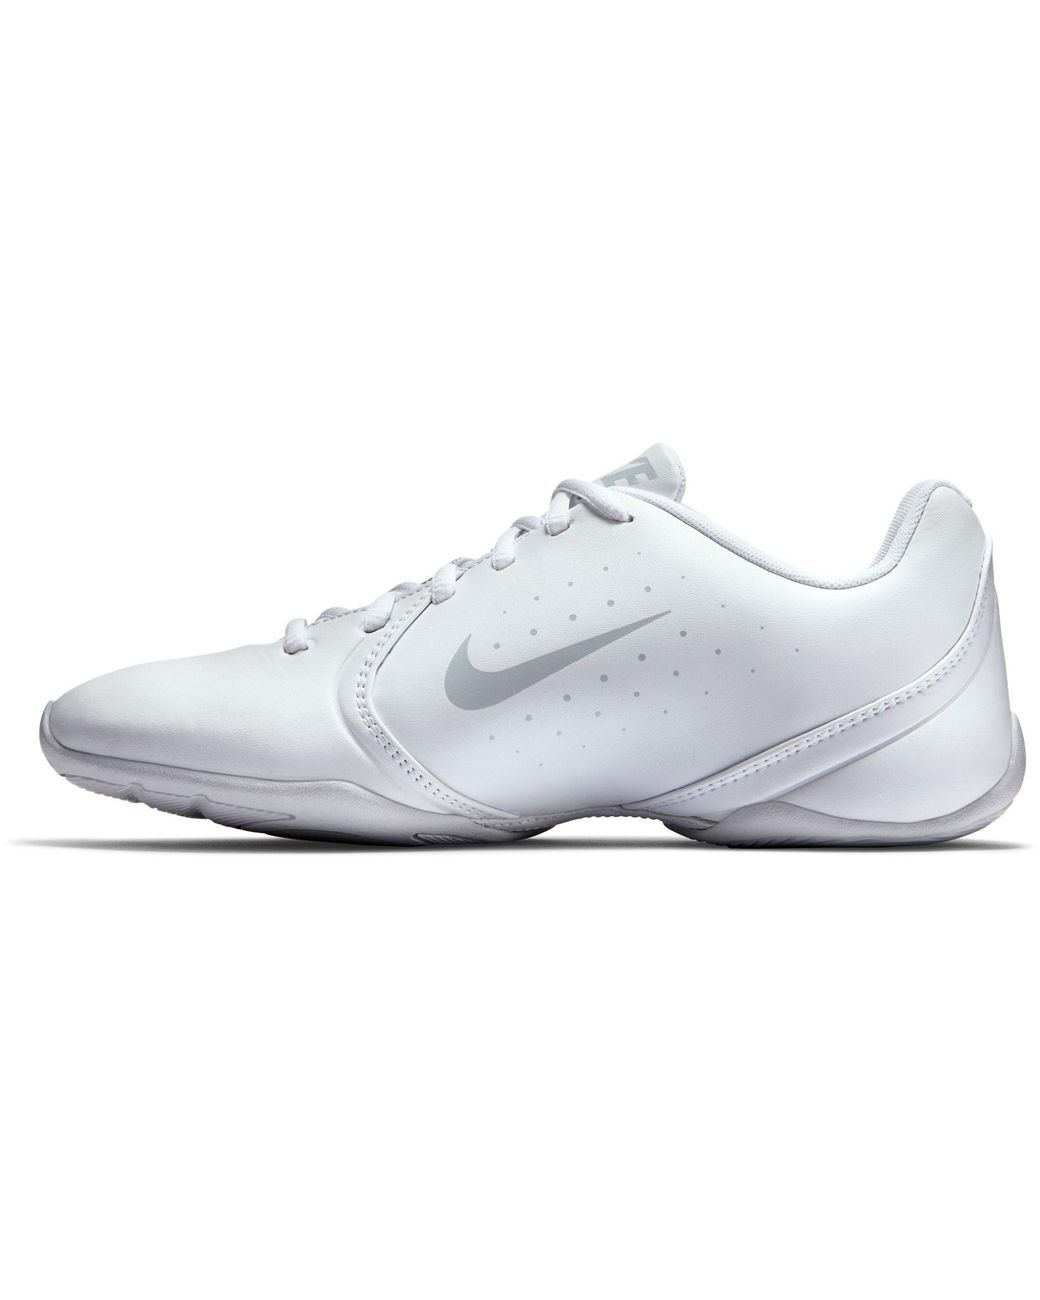 Nike Synthetic Sideline Iii Cheerleading Shoes in White/Platinum (White) |  Lyst